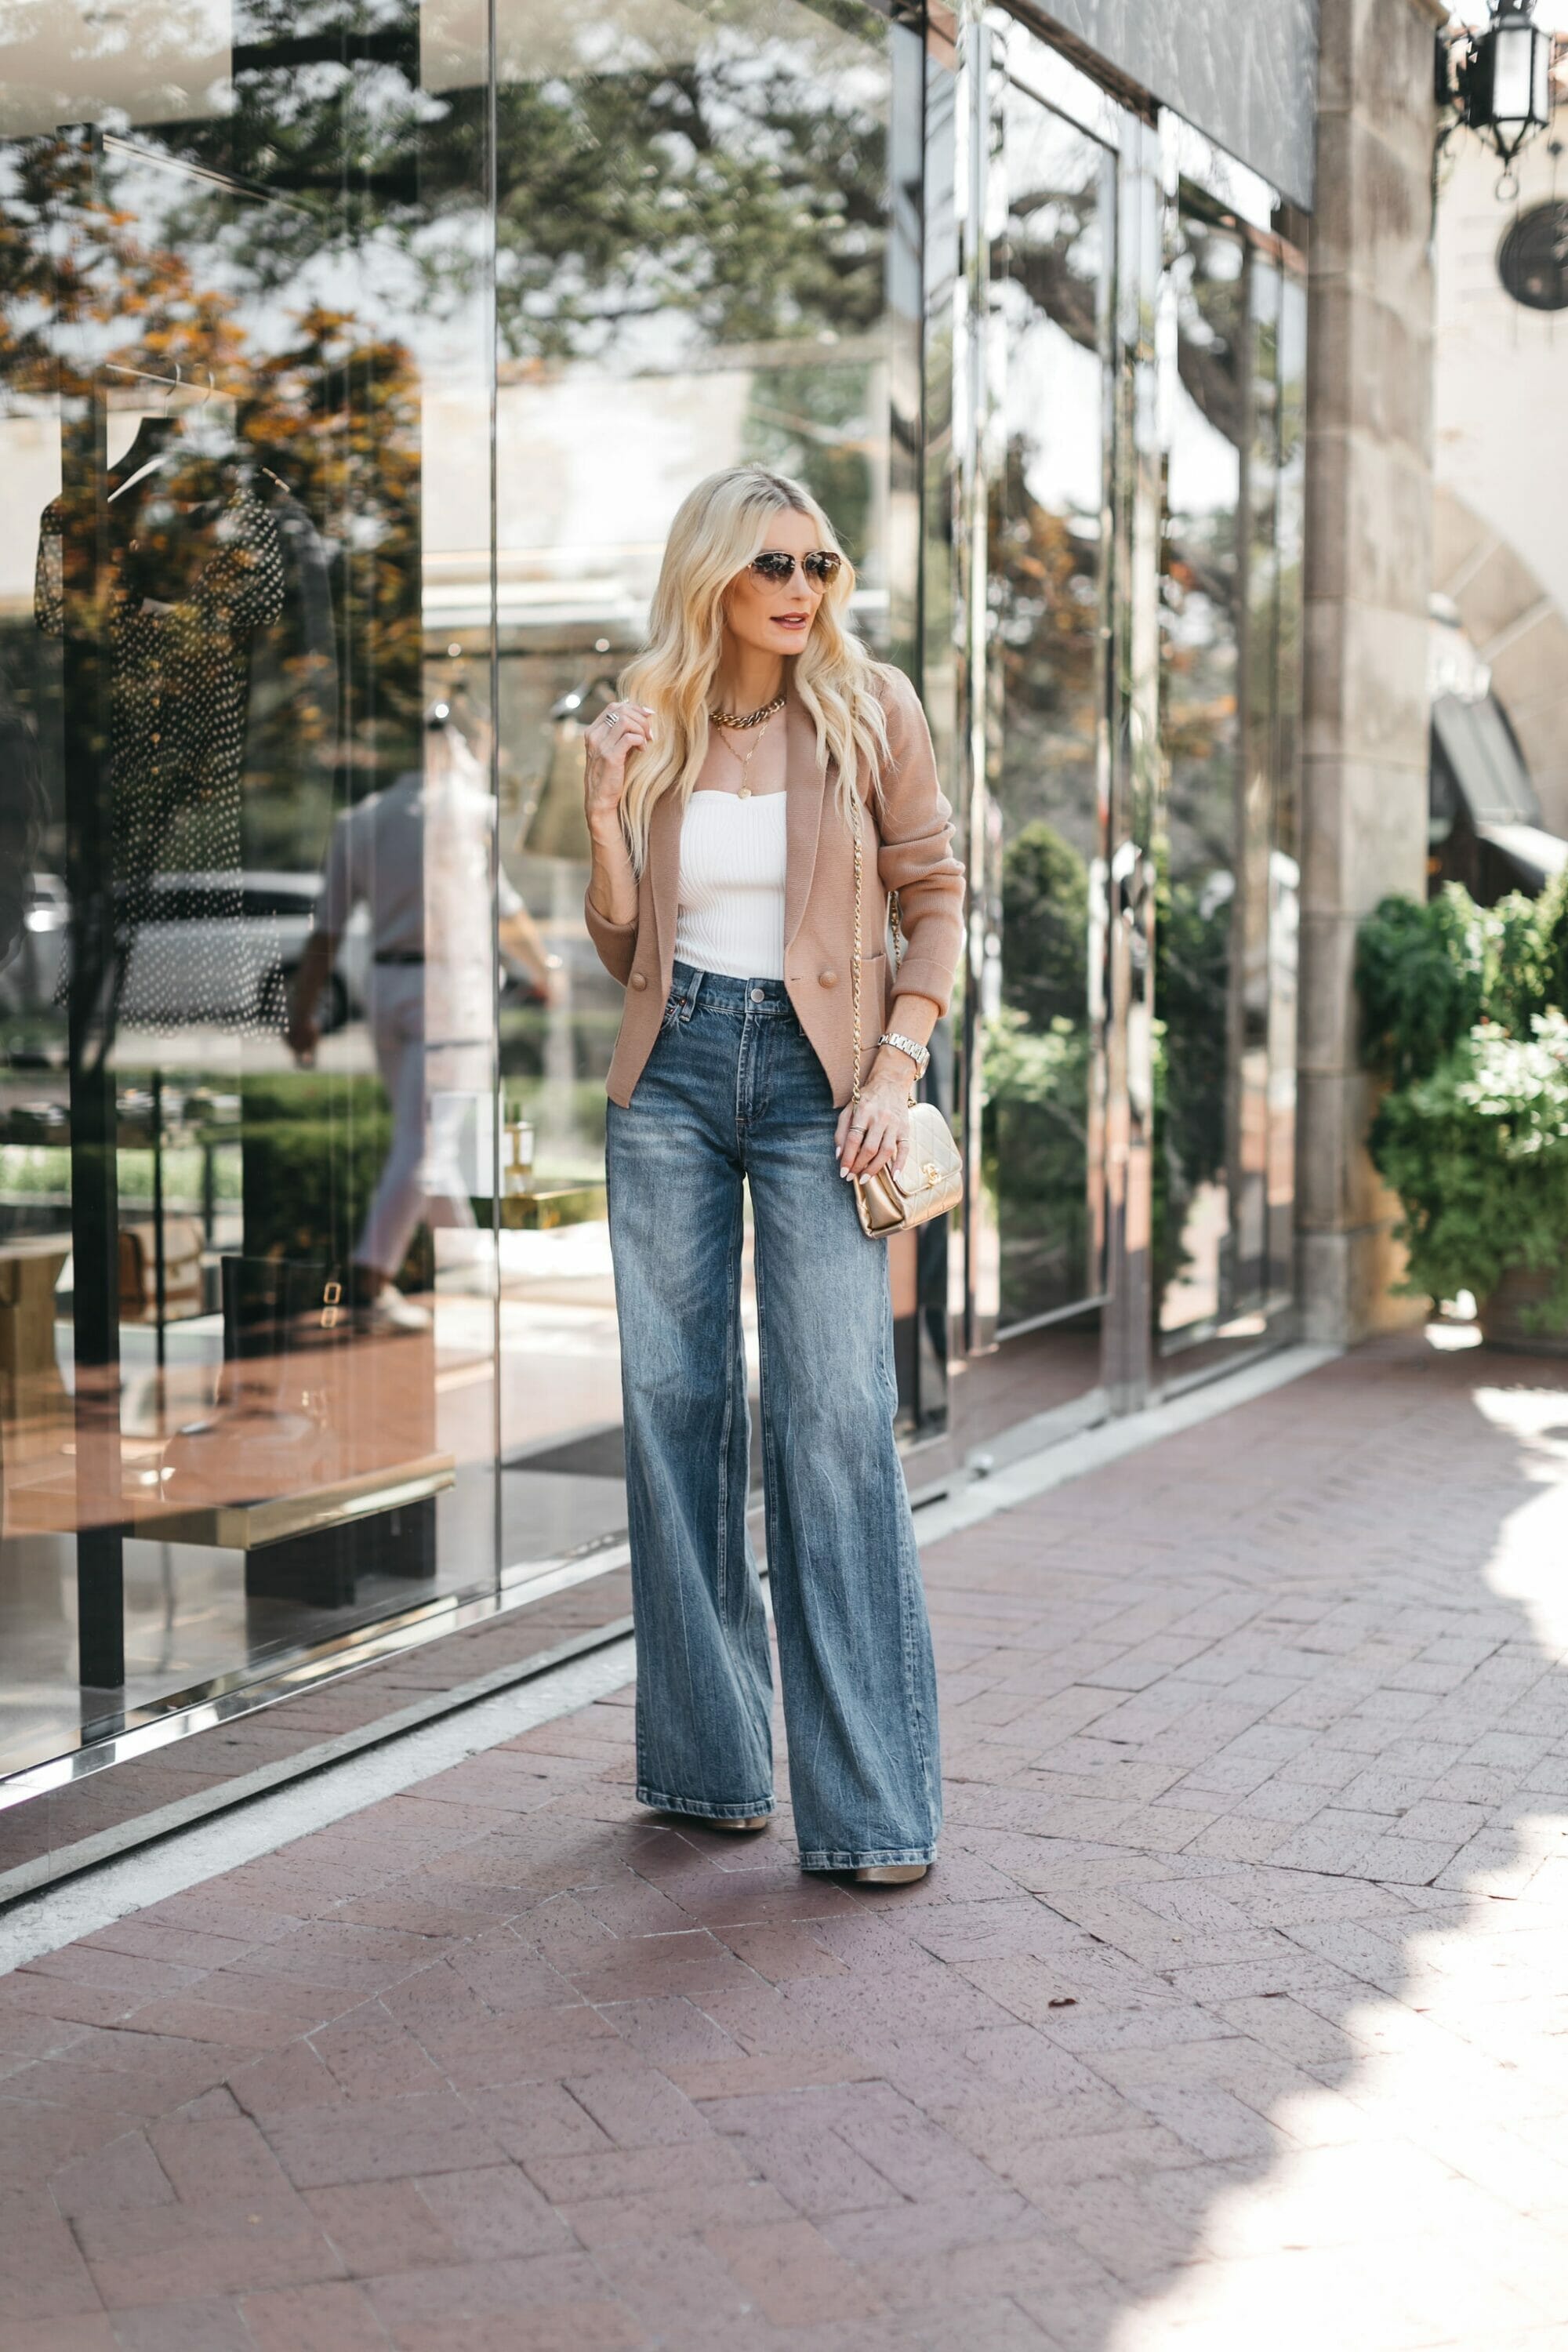 Dallas influencer for women over 40 wearing wide leg jeans and a tan blazer over a white bodysuit.